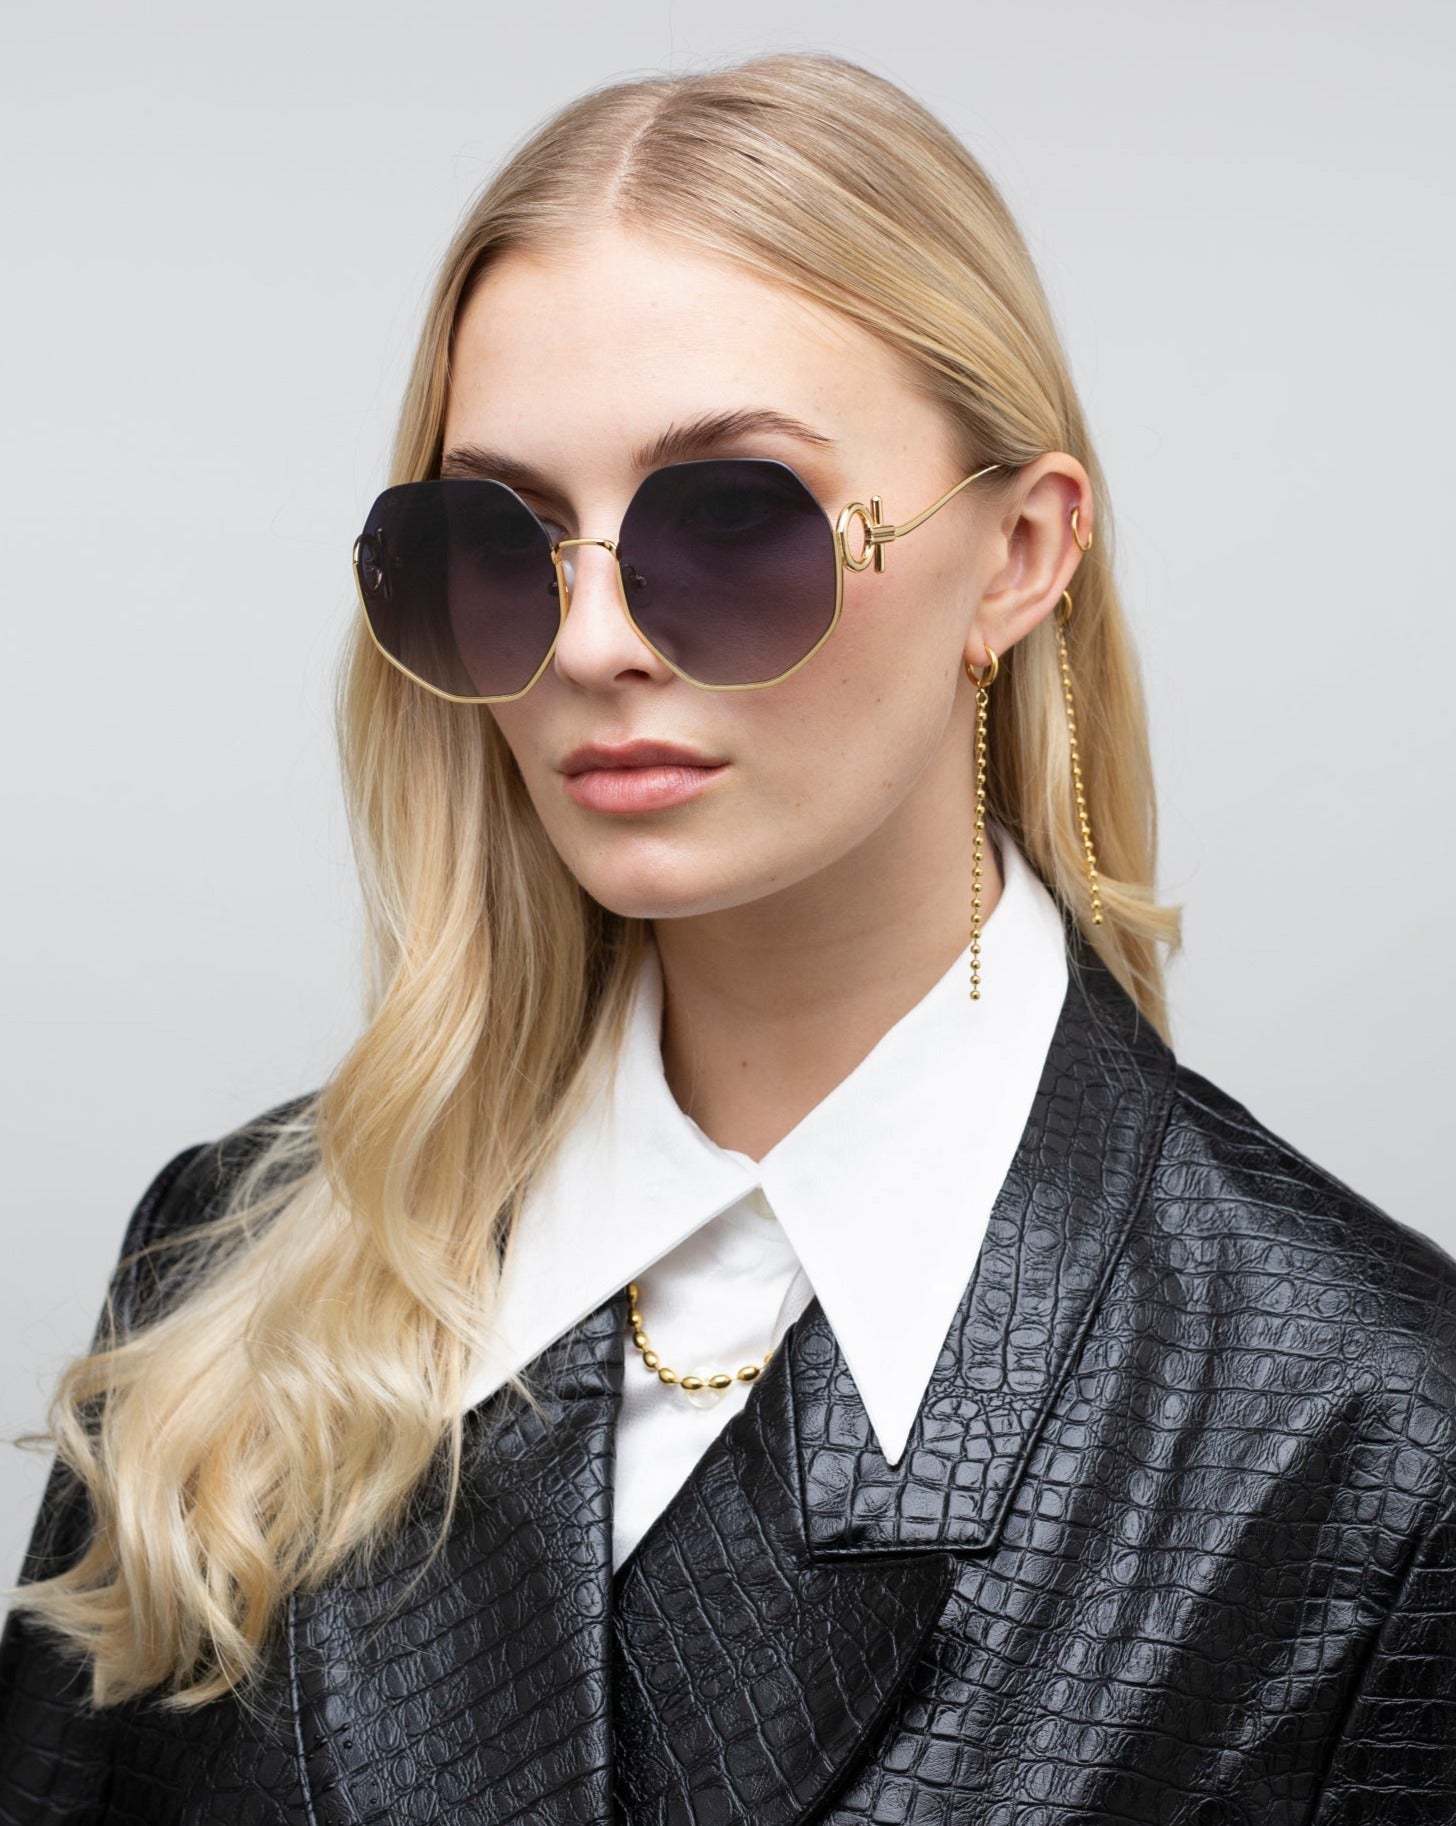 A woman with long blonde hair wearing large, round For Art&#39;s Sake® Palace sunglasses that are UVA &amp; UVB-protected and a black, textured leather jacket. She has a white collared shirt underneath and is accessorized with a dangling earring and an 18-karat gold-plated chain necklace. The background is plain and light-colored.